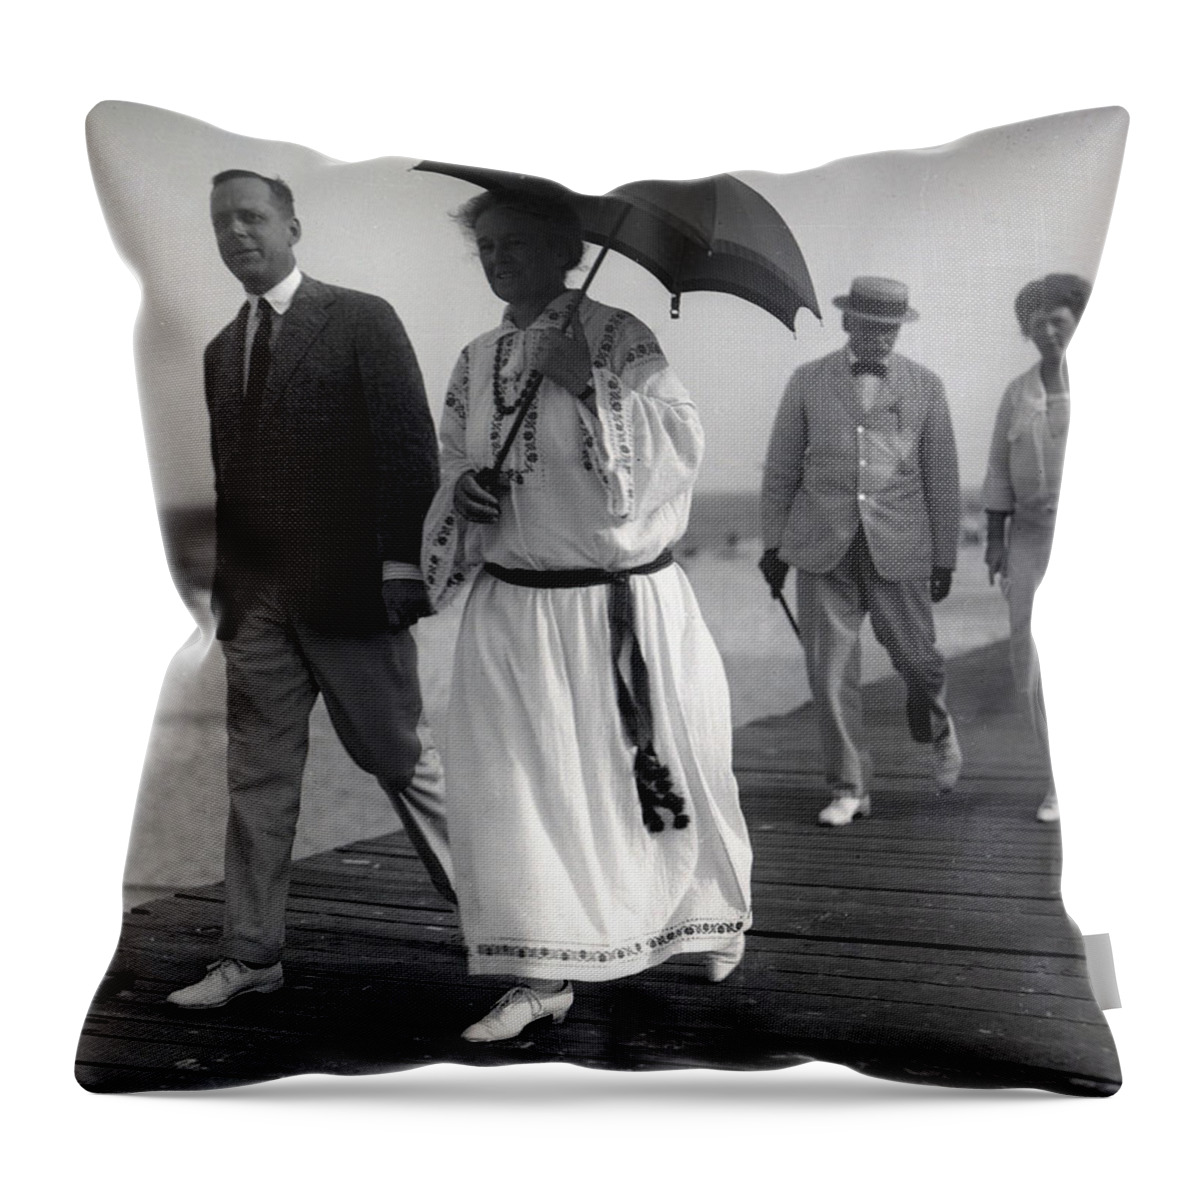 Vintage Photographs Throw Pillow featuring the photograph Yesteryear Board Walk by William Haggart